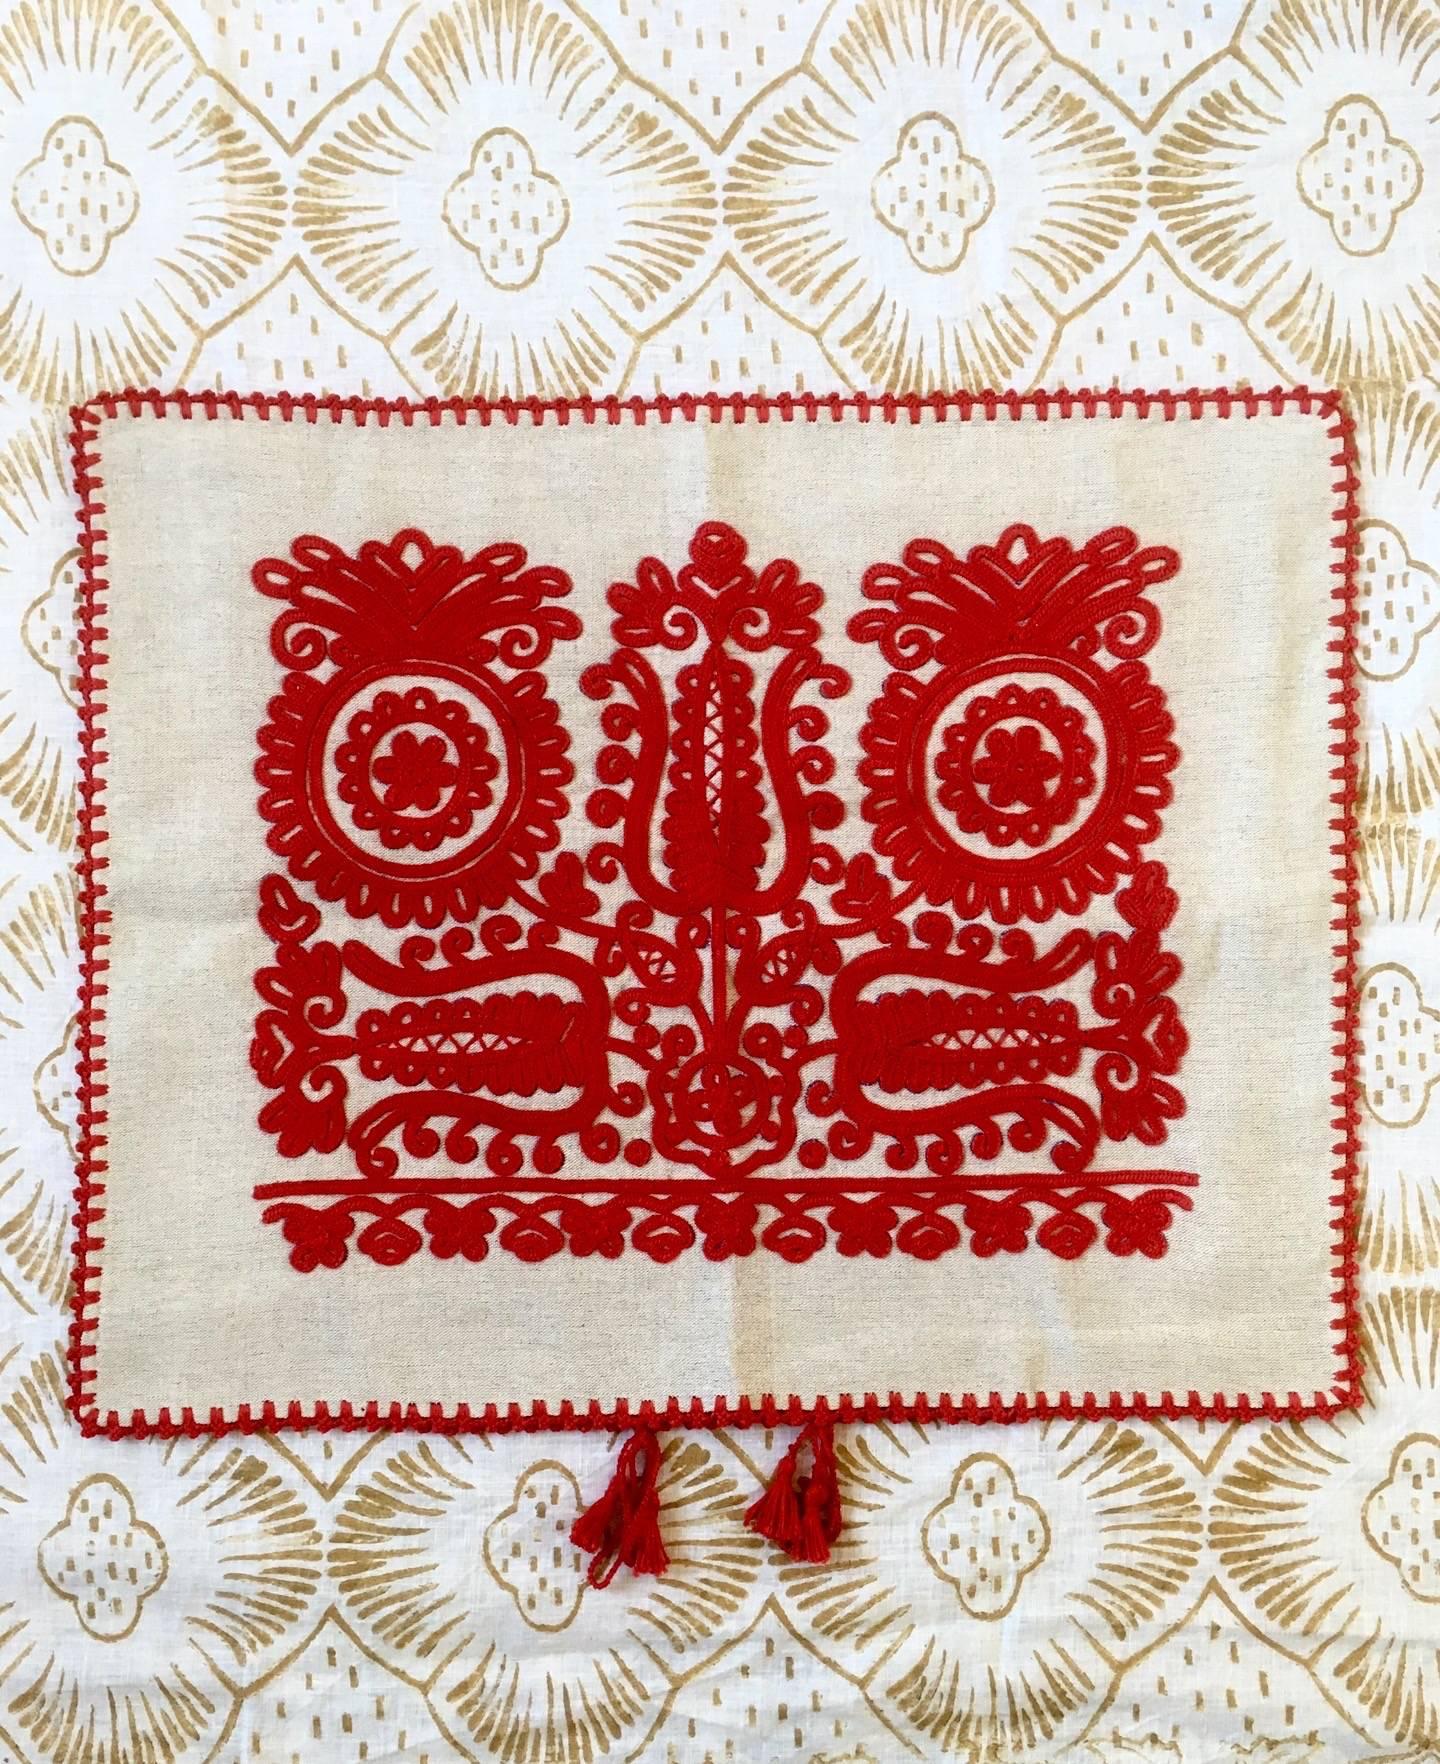 Transylvanian embroidered red cushion cover 
Embroidered by hand in the traditional way in Transylvania.
It comes with polyester pillow insert.

You can order as many cushions as desired.